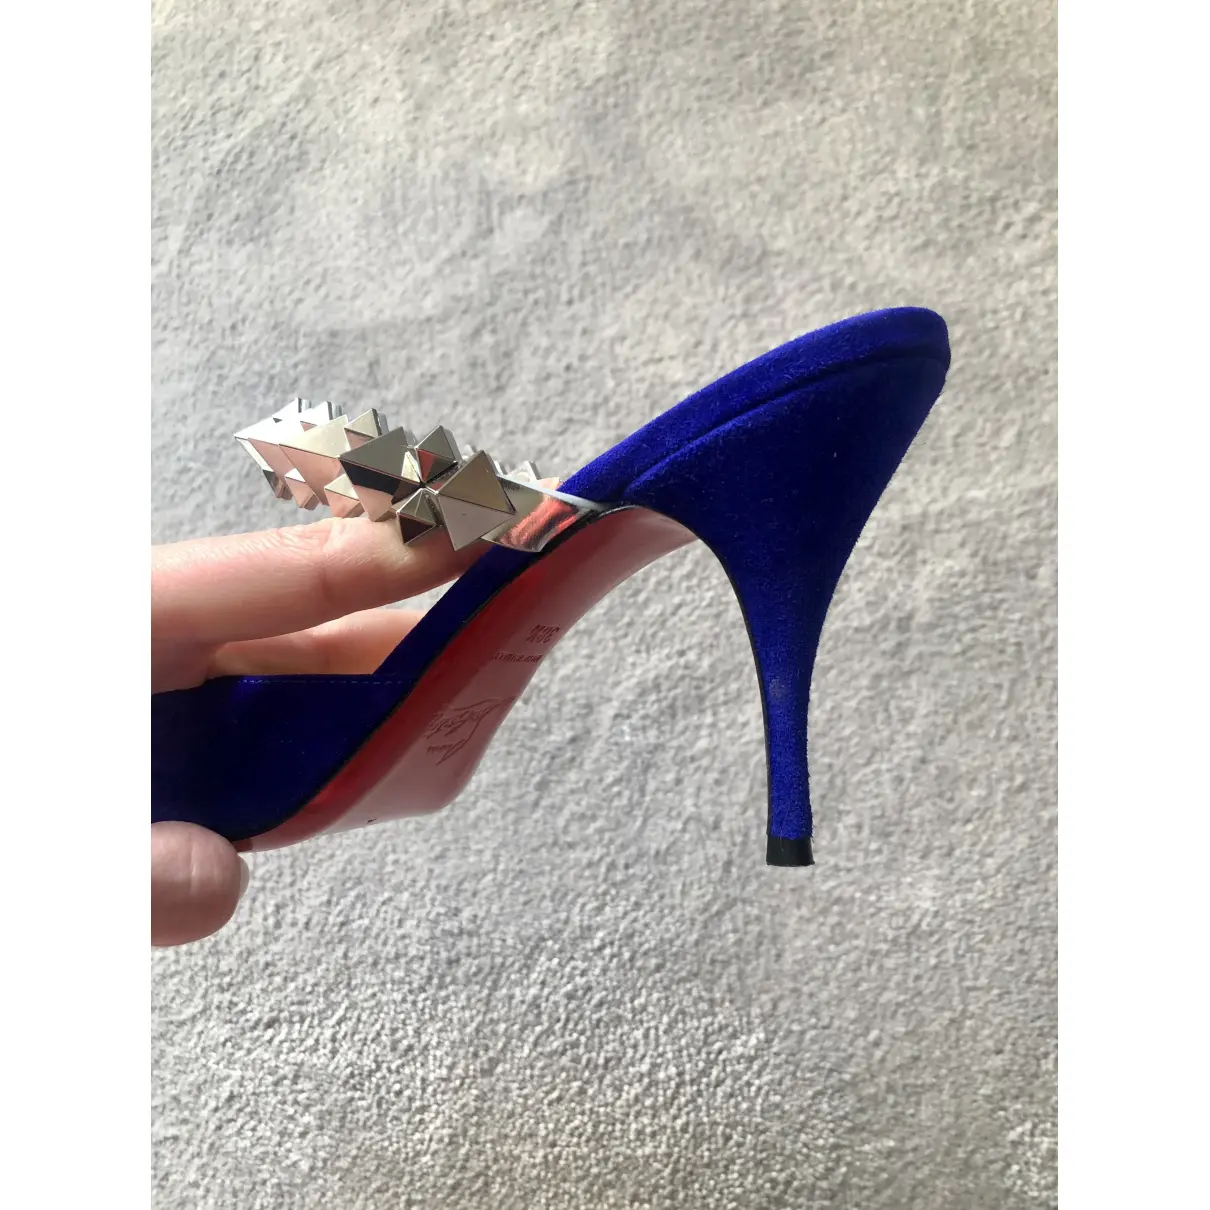 Buy Christian Louboutin Blue Suede Sandals online